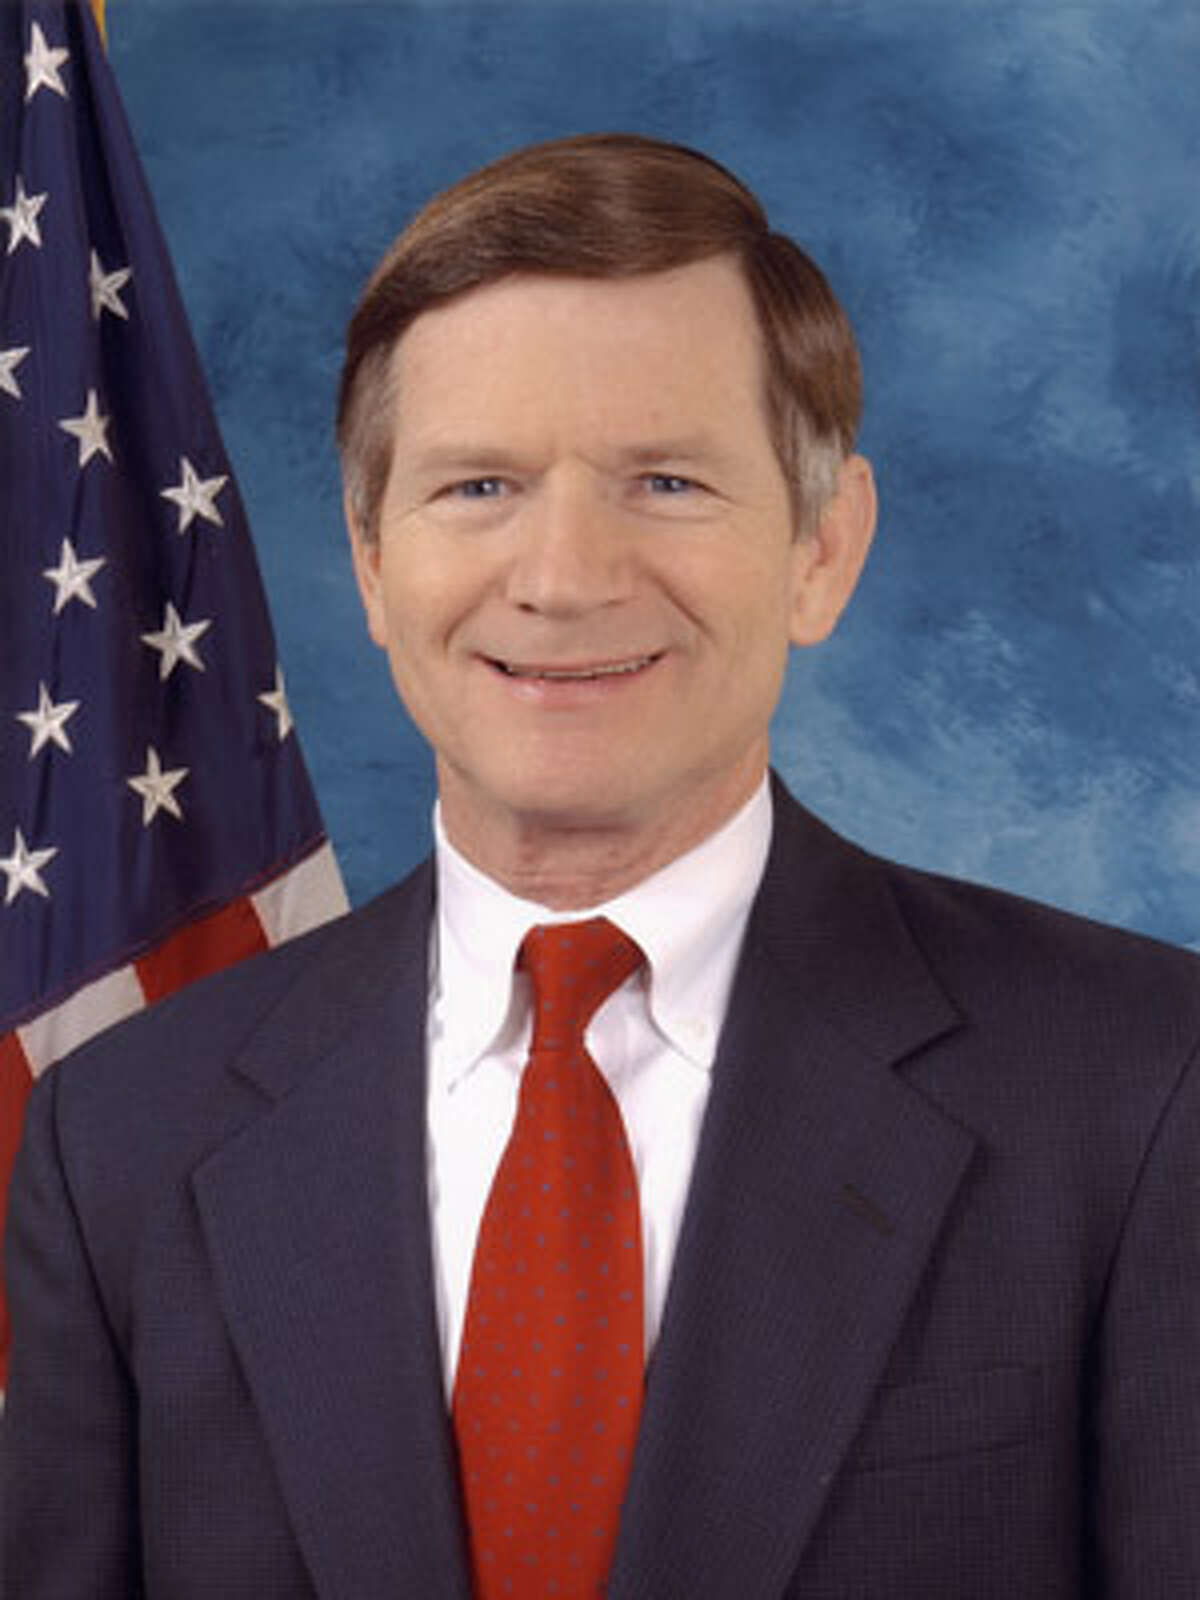 Lamar Smith: The GOP position on immigration is what Americans want.